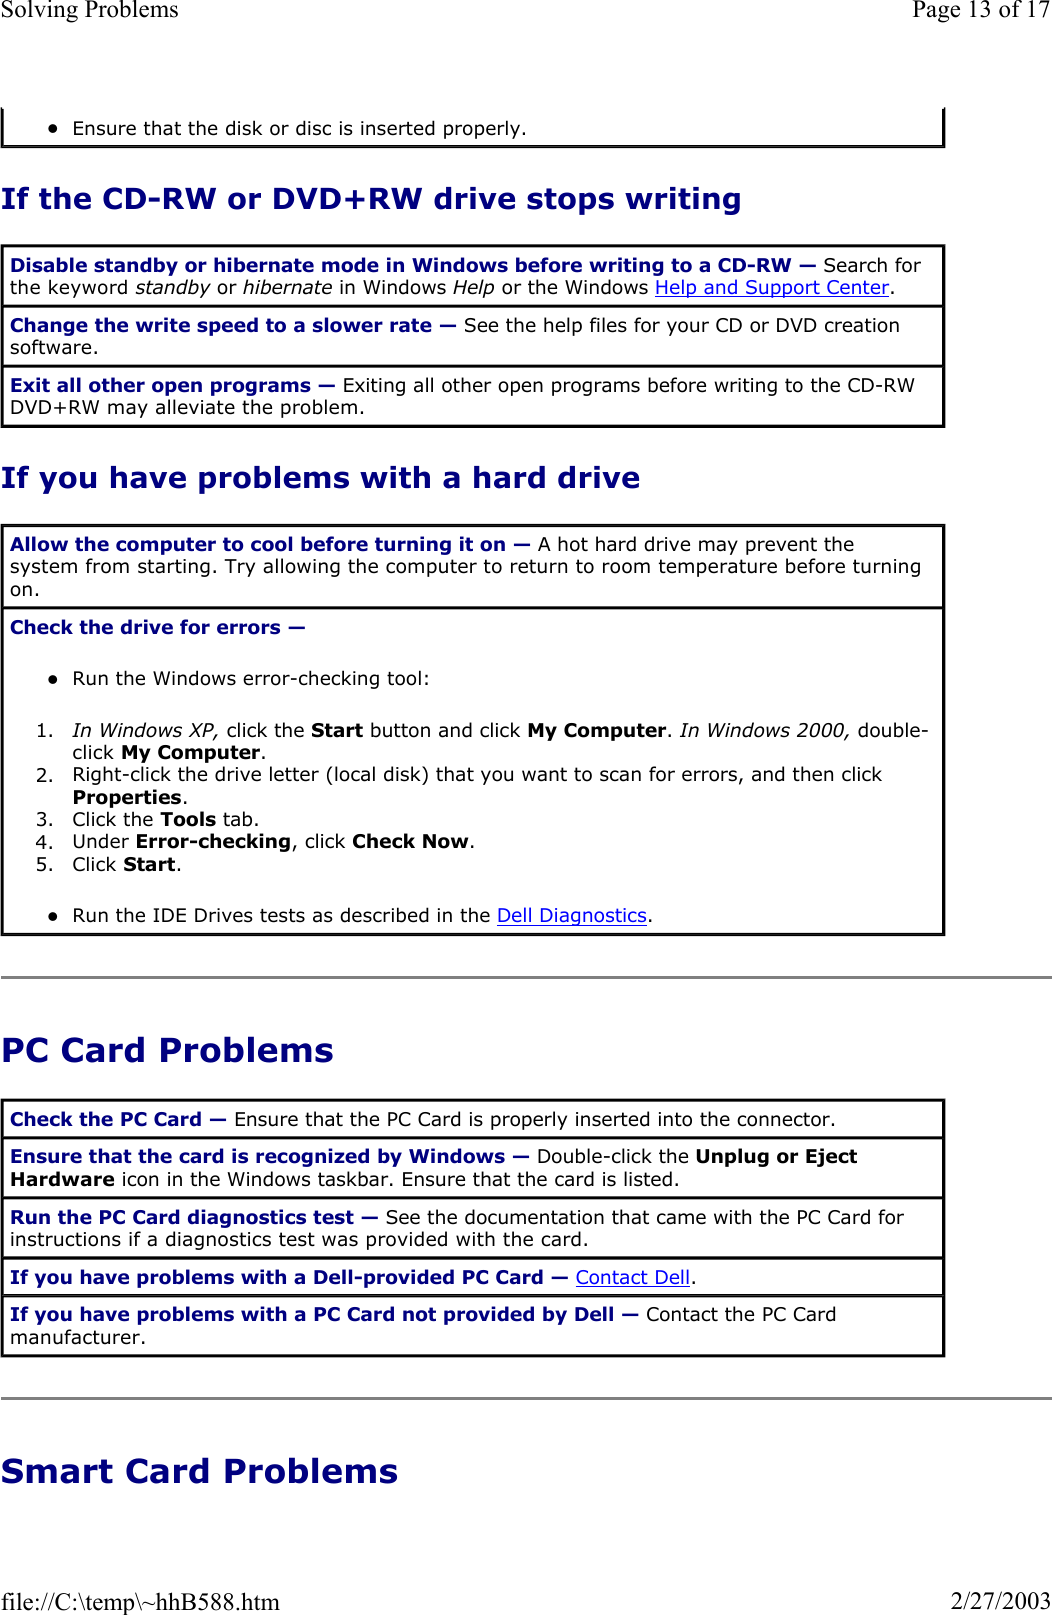 If the CD-RW or DVD+RW drive stops writing If you have problems with a hard drive PC Card Problems Smart Card Problems zEnsure that the disk or disc is inserted properly.  Disable standby or hibernate mode in Windows before writing to a CD-RW — Search for the keyword standby or hibernate in Windows Help or the Windows Help and Support Center.Change the write speed to a slower rate — See the help files for your CD or DVD creation software. Exit all other open programs — Exiting all other open programs before writing to the CD-RW DVD+RW may alleviate the problem. Allow the computer to cool before turning it on — A hot hard drive may prevent the system from starting. Try allowing the computer to return to room temperature before turning on. Check the drive for errors —zRun the Windows error-checking tool:  1. In Windows XP, click the Start button and click My Computer.In Windows 2000, double-click My Computer.2. Right-click the drive letter (local disk) that you want to scan for errors, and then click Properties.3. Click the Tools tab.  4. Under Error-checking, click Check Now.5. Click Start.zRun the IDE Drives tests as described in the Dell Diagnostics.Check the PC Card — Ensure that the PC Card is properly inserted into the connector. Ensure that the card is recognized by Windows — Double-click the Unplug or Eject Hardware icon in the Windows taskbar. Ensure that the card is listed. Run the PC Card diagnostics test — See the documentation that came with the PC Card for instructions if a diagnostics test was provided with the card. If you have problems with a Dell-provided PC Card — Contact Dell.If you have problems with a PC Card not provided by Dell — Contact the PC Card manufacturer. Page 13 of 17Solving Problems2/27/2003file://C:\temp\~hhB588.htm